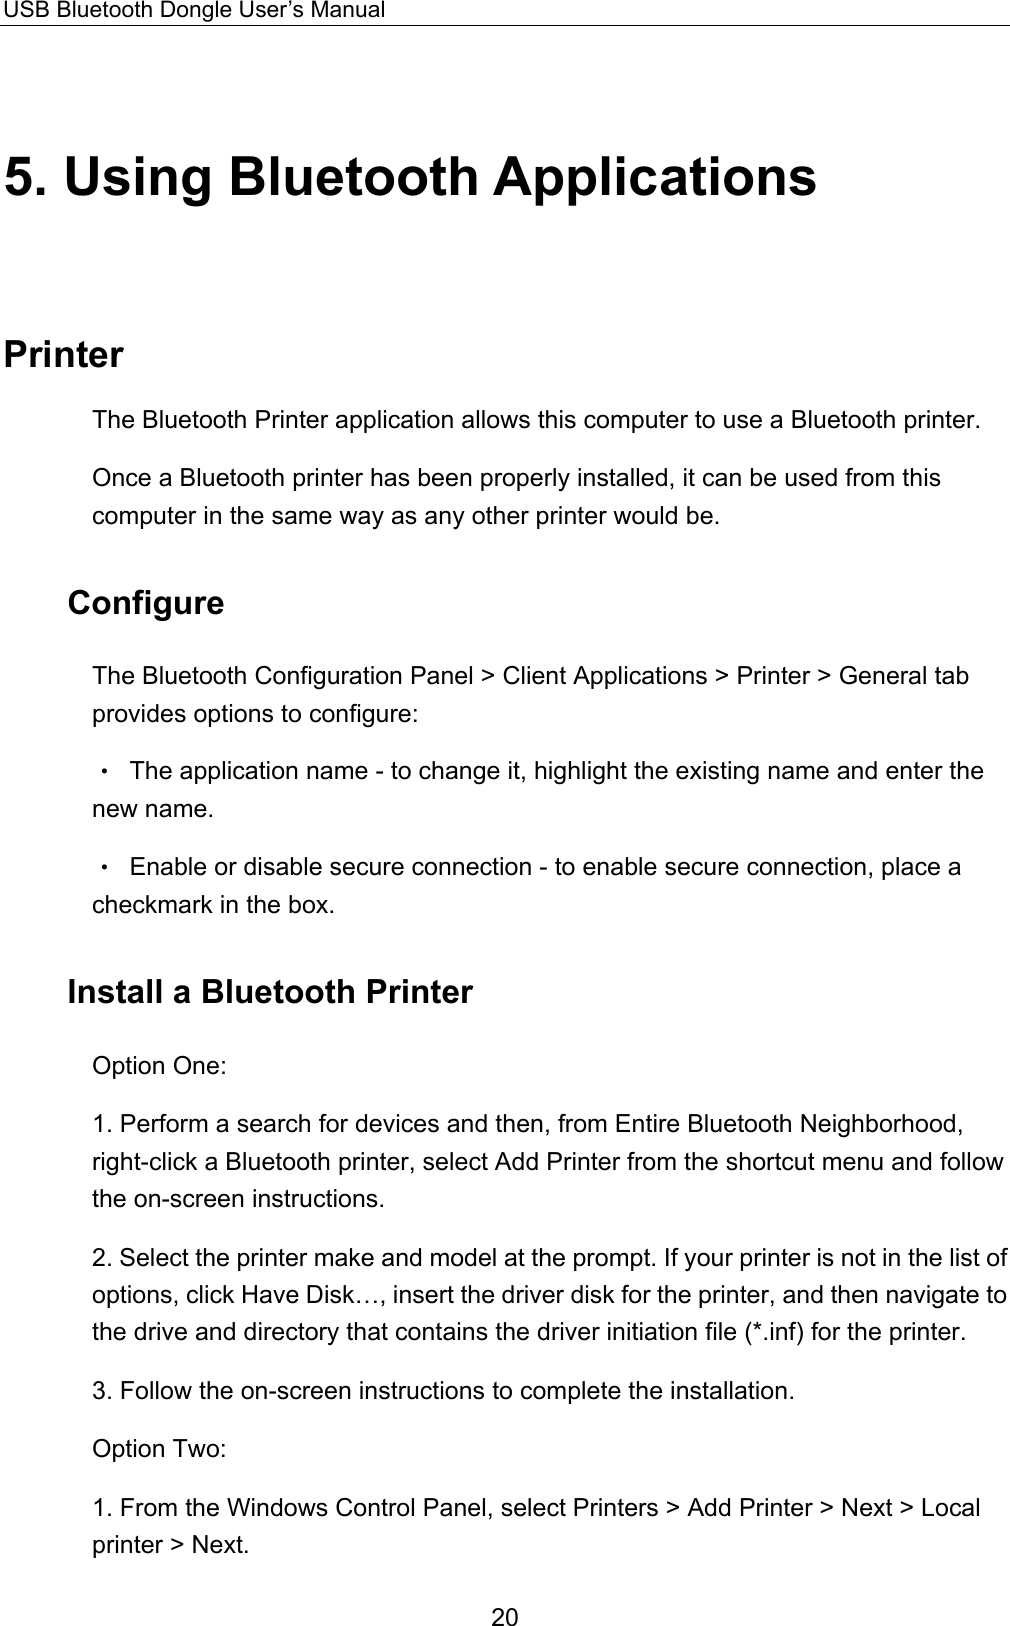 USB Bluetooth Dongle User’s Manual 20 5. Using Bluetooth Applications Printer The Bluetooth Printer application allows this computer to use a Bluetooth printer. Once a Bluetooth printer has been properly installed, it can be used from this computer in the same way as any other printer would be. Configure The Bluetooth Configuration Panel &gt; Client Applications &gt; Printer &gt; General tab provides options to configure: •  The application name - to change it, highlight the existing name and enter the new name. •  Enable or disable secure connection - to enable secure connection, place a checkmark in the box. Install a Bluetooth Printer Option One: 1. Perform a search for devices and then, from Entire Bluetooth Neighborhood, right-click a Bluetooth printer, select Add Printer from the shortcut menu and follow the on-screen instructions. 2. Select the printer make and model at the prompt. If your printer is not in the list of options, click Have Disk…, insert the driver disk for the printer, and then navigate to the drive and directory that contains the driver initiation file (*.inf) for the printer. 3. Follow the on-screen instructions to complete the installation. Option Two: 1. From the Windows Control Panel, select Printers &gt; Add Printer &gt; Next &gt; Local printer &gt; Next. 